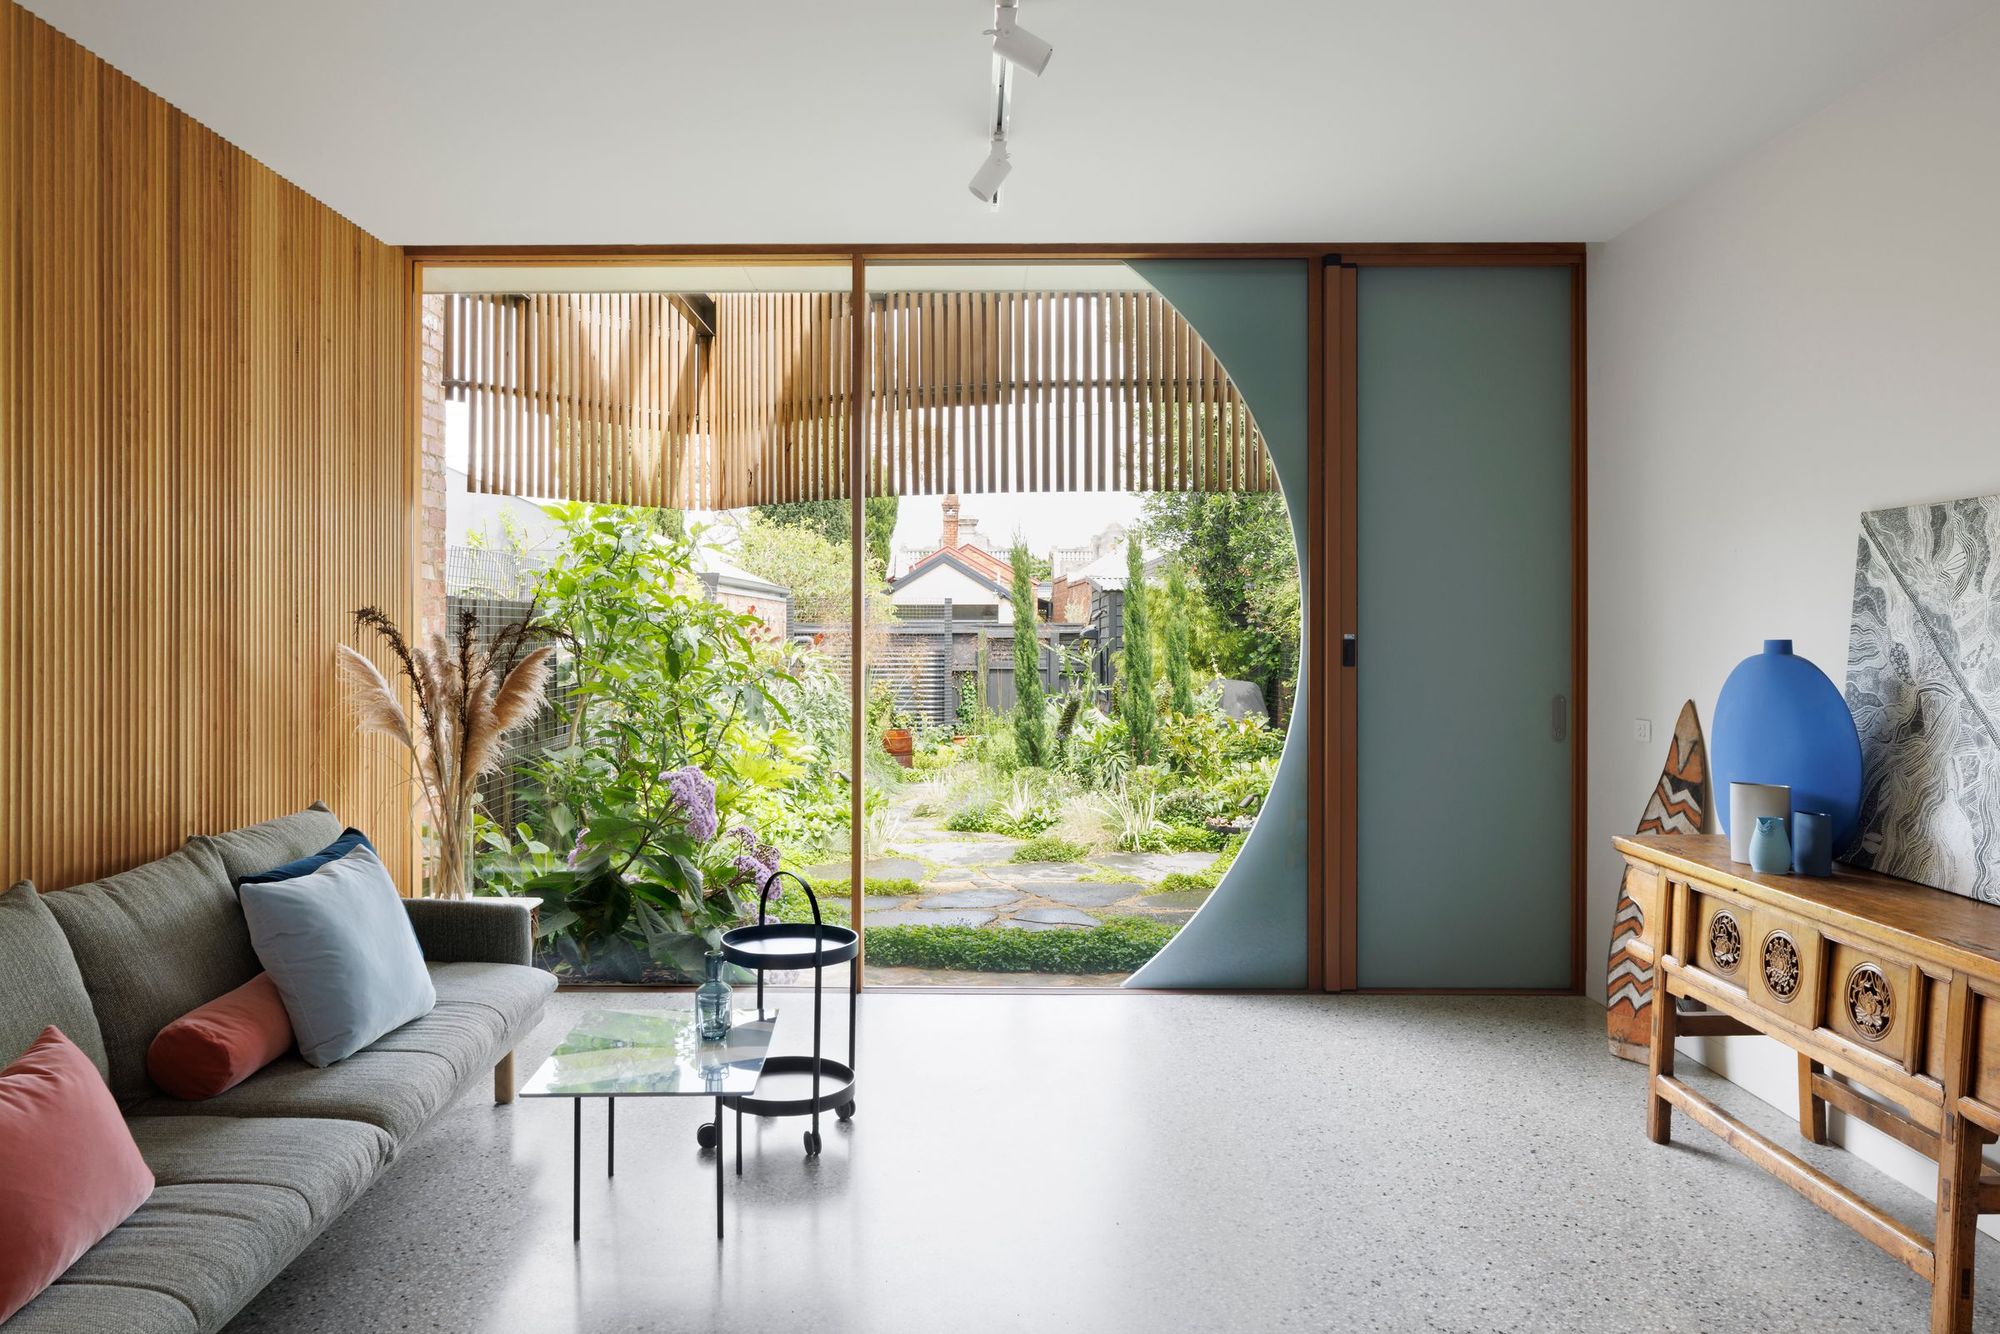 Tiara House by FMD Architects. New extension, living room view out to backyard 